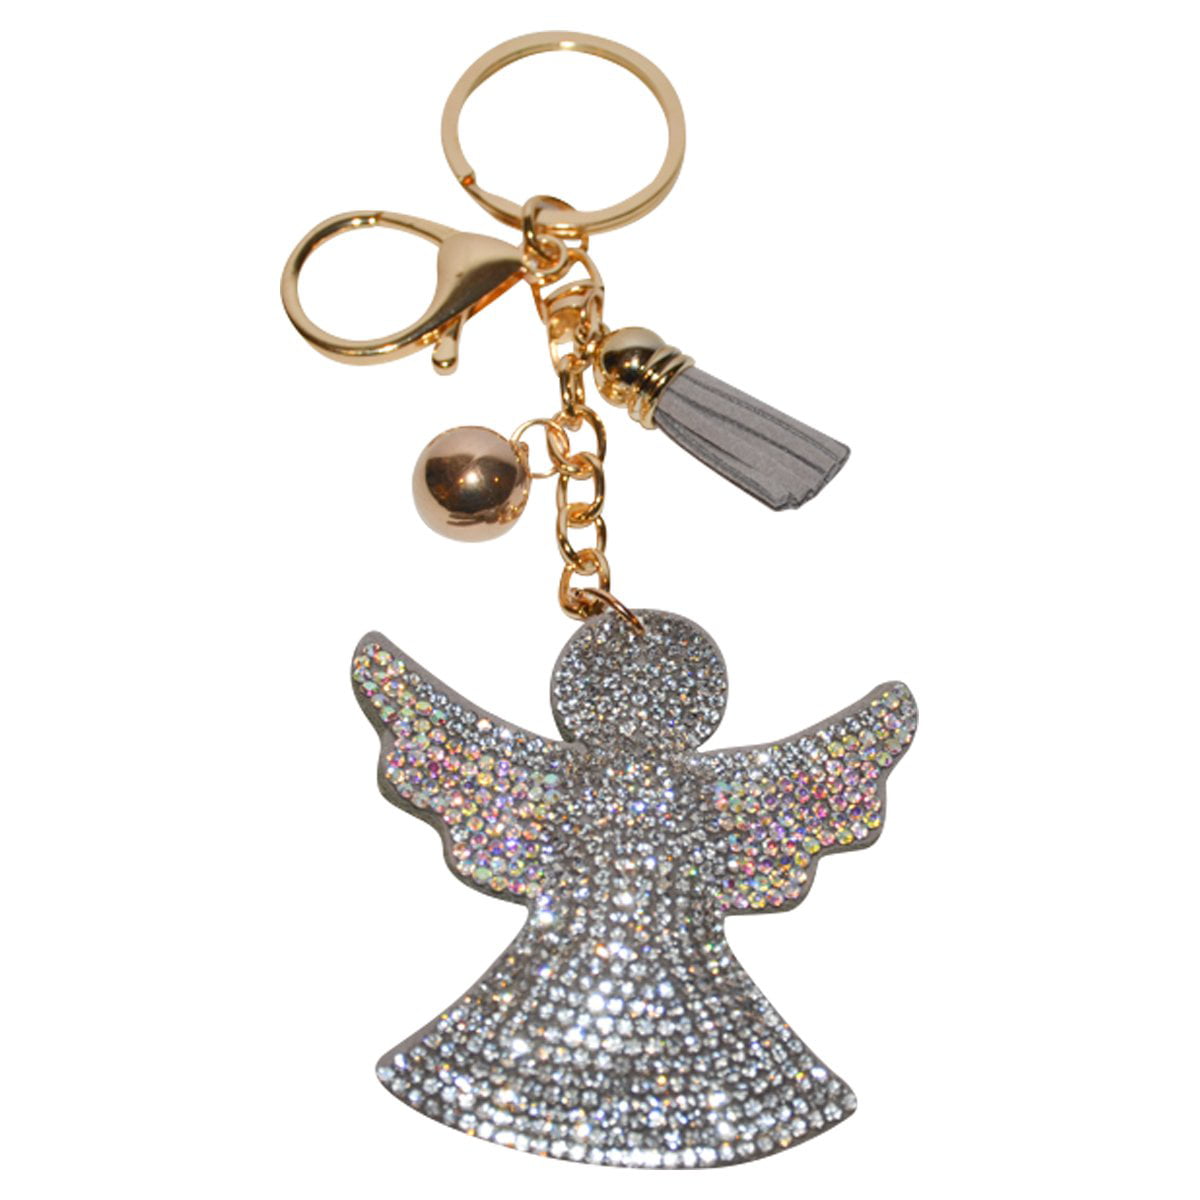 Cute Key Fob Key Chain Popfizzy Crystal Keychain for Women and Girls Rhinestone Purse Charms Bling Backpack Accessories 